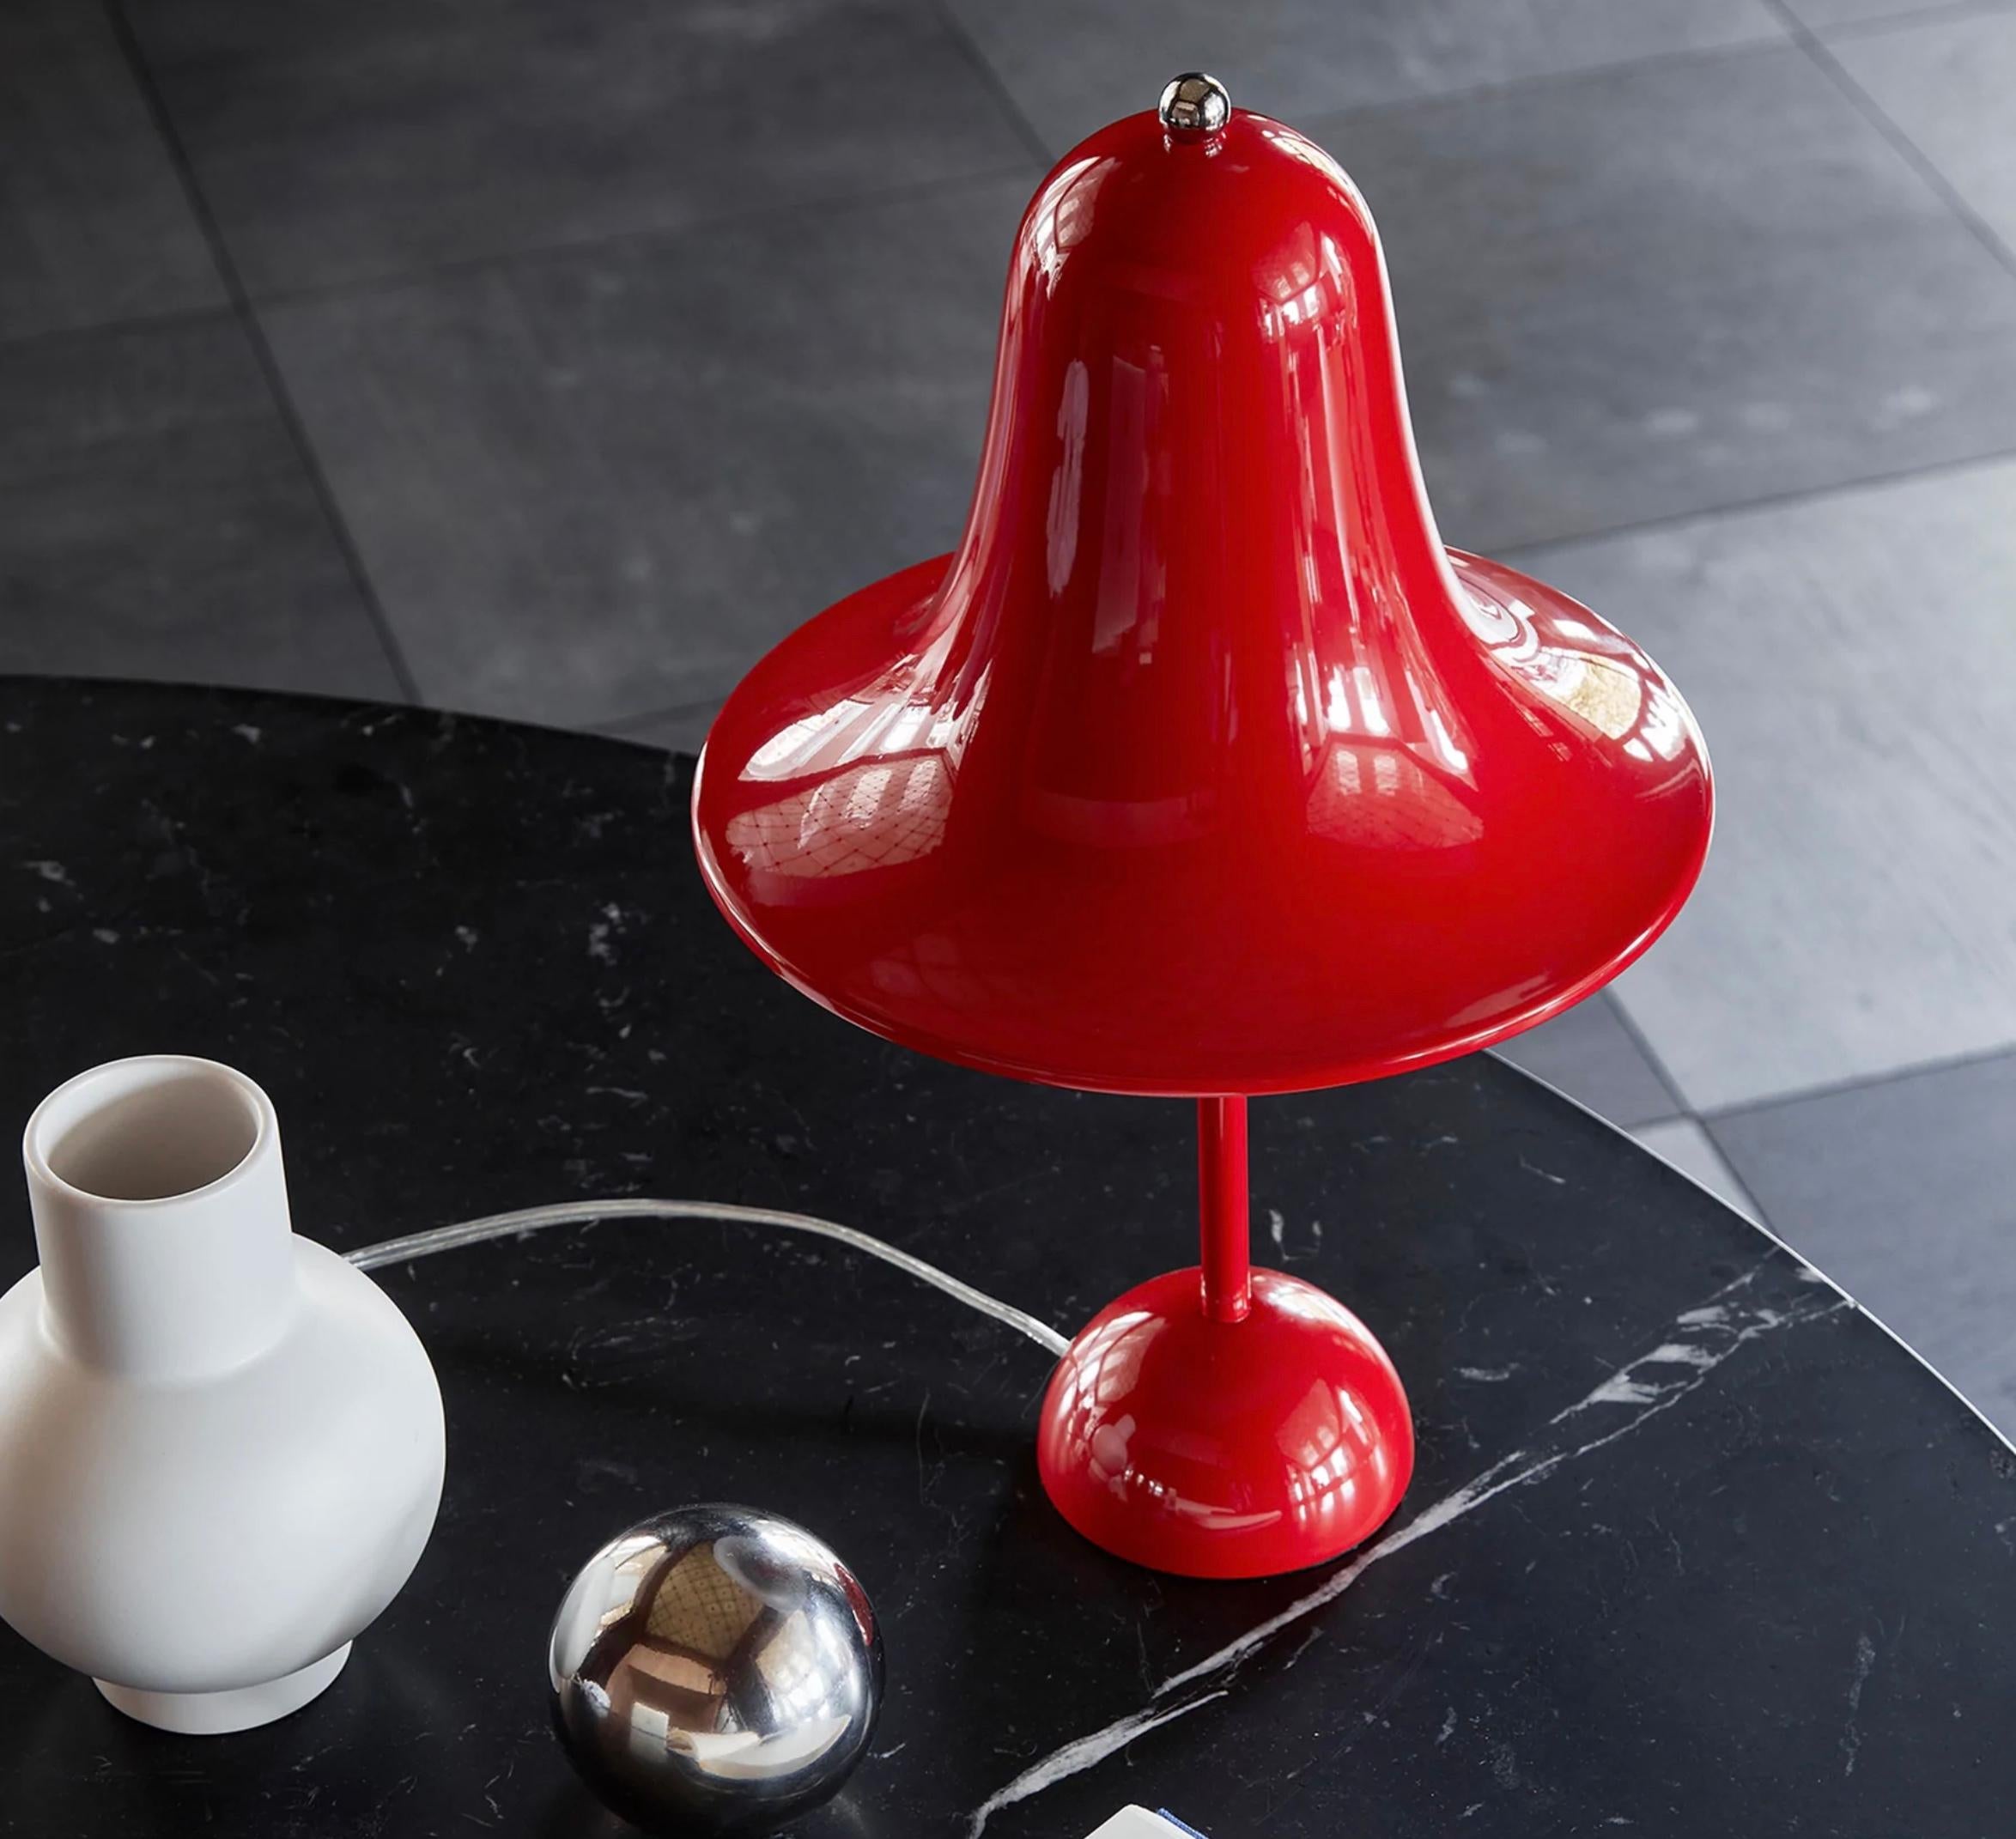 Verner Panton 'Pantop' table lamp in 'bright red' for Verpan. Designed in 1980. New, current production.

The elegant Pantop line was designed by Verner Panton in 1980, and has for a long time been a staple of the Verpan collection. Pantop is